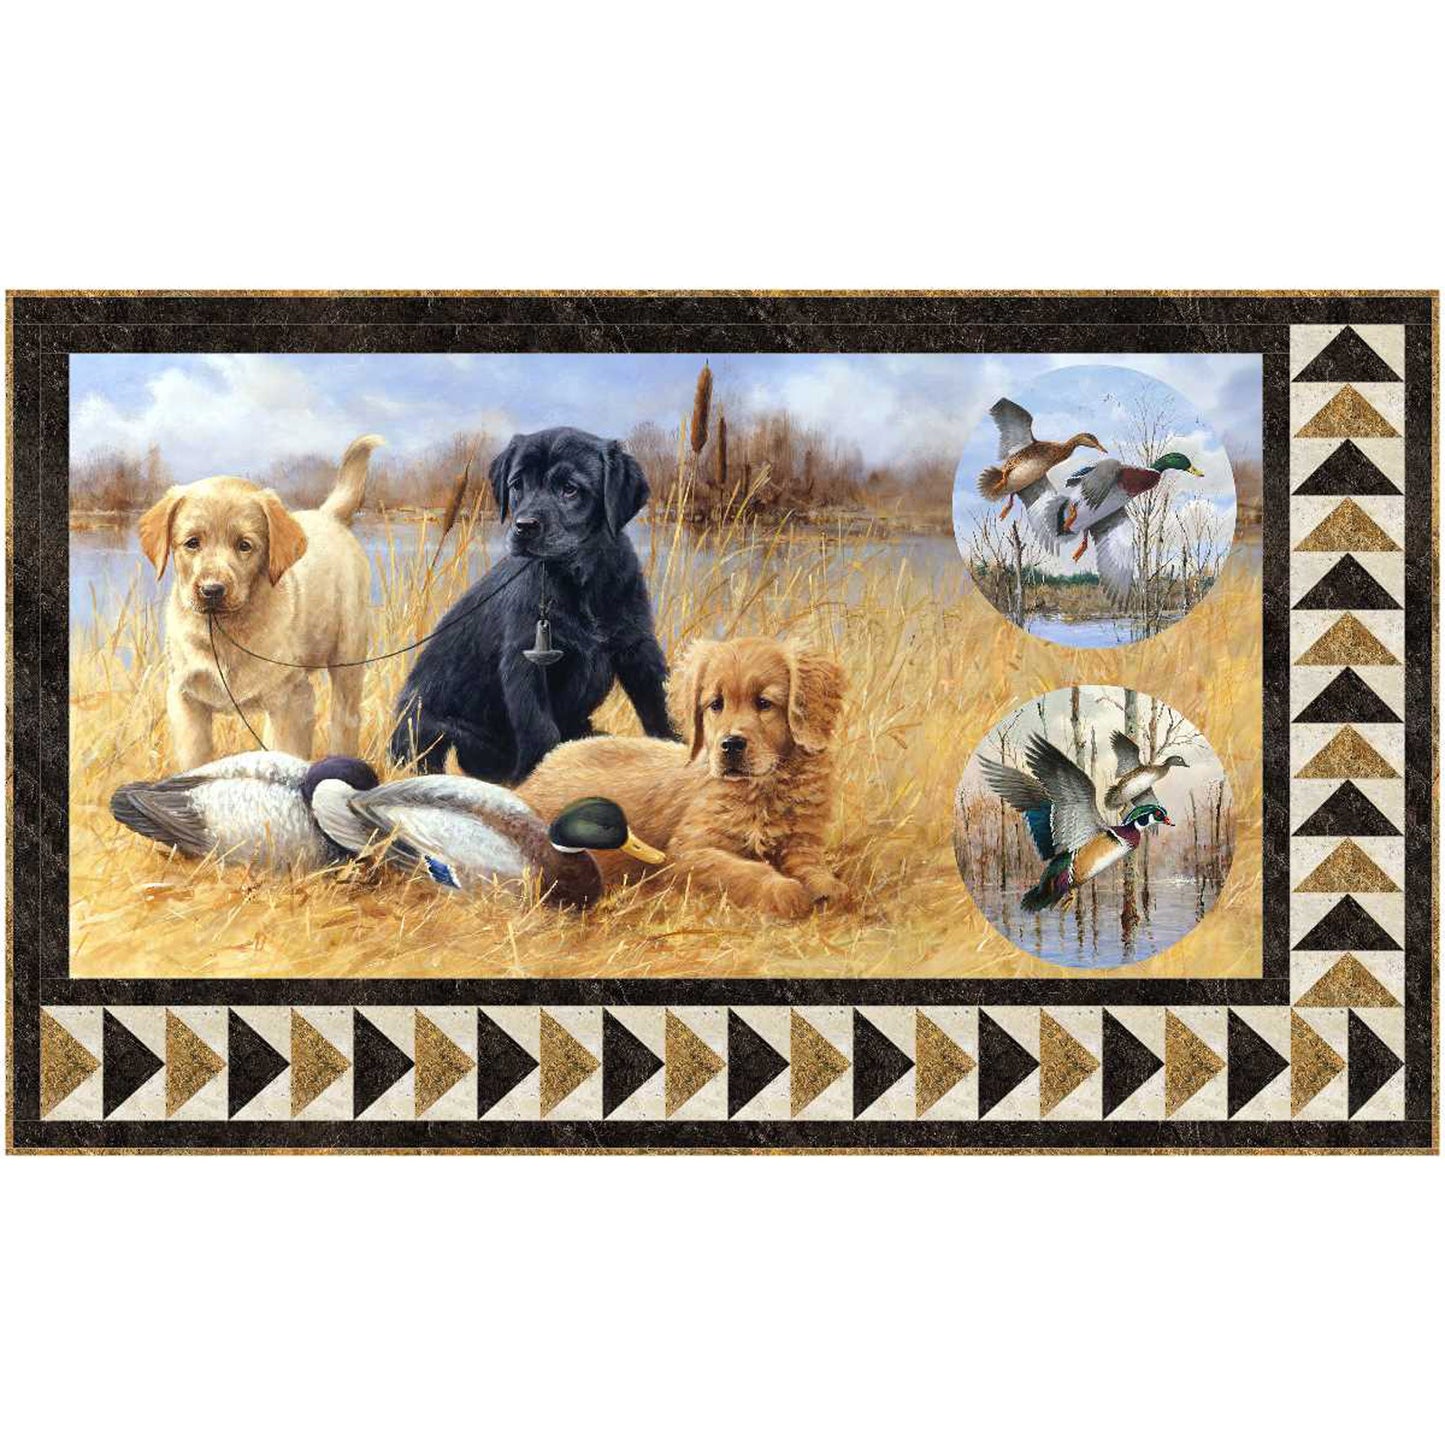 A charming quilt showcasing adorable hunting dogs with their ducks perfect for any hunter or sportsman. Perfect wall hanging size has quilt flying geese on bottom and right side of panel.